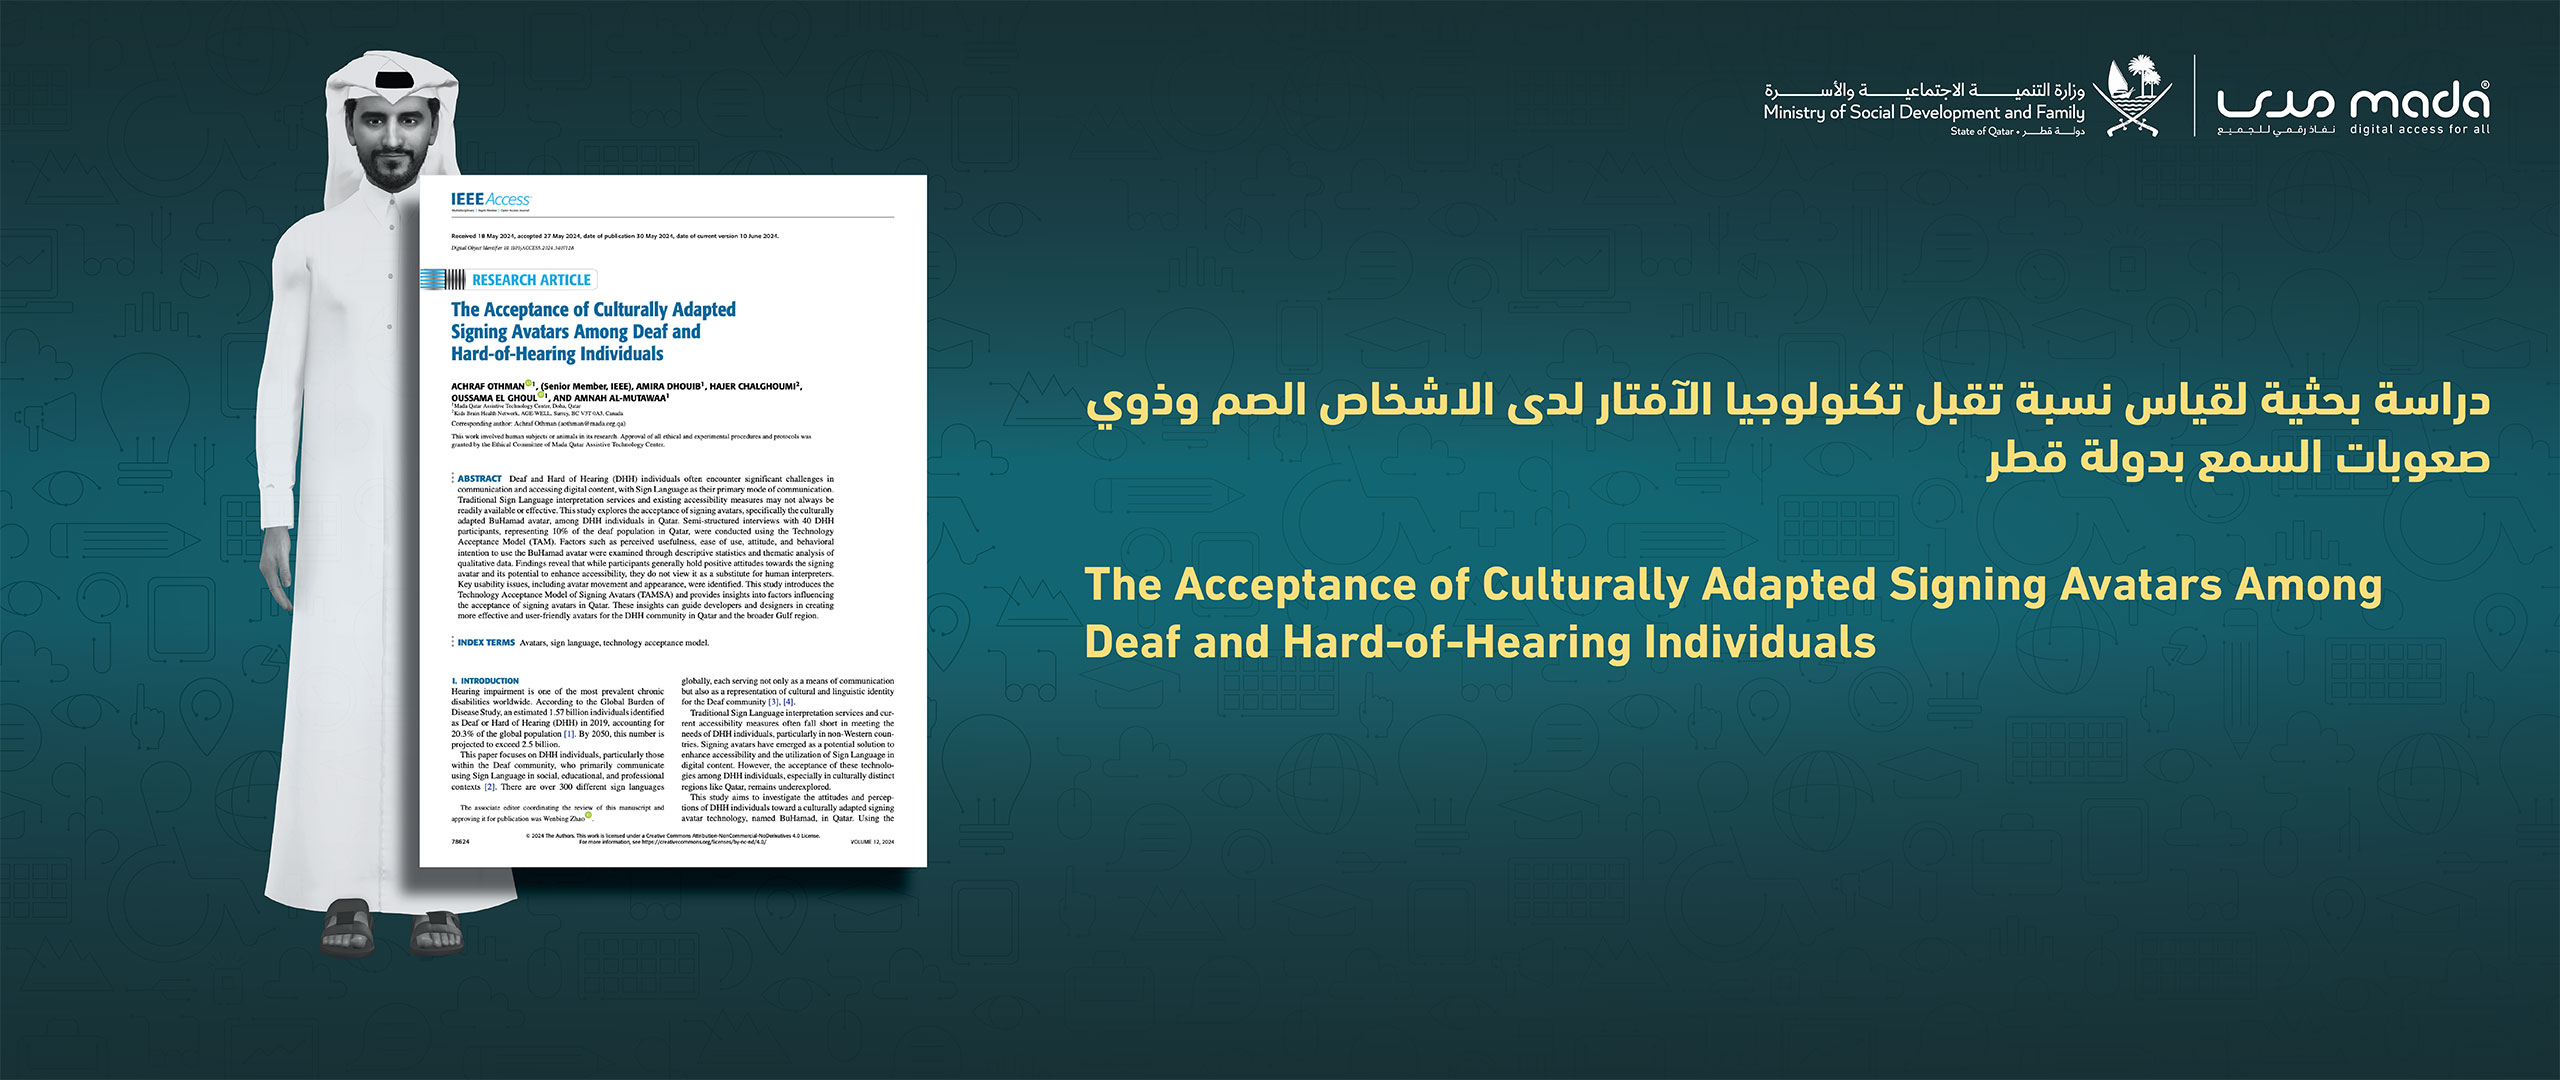 The Acceptance of Culturally Adapted Signing Avatars Among Deaf and Hard-of-Hearing Individuals